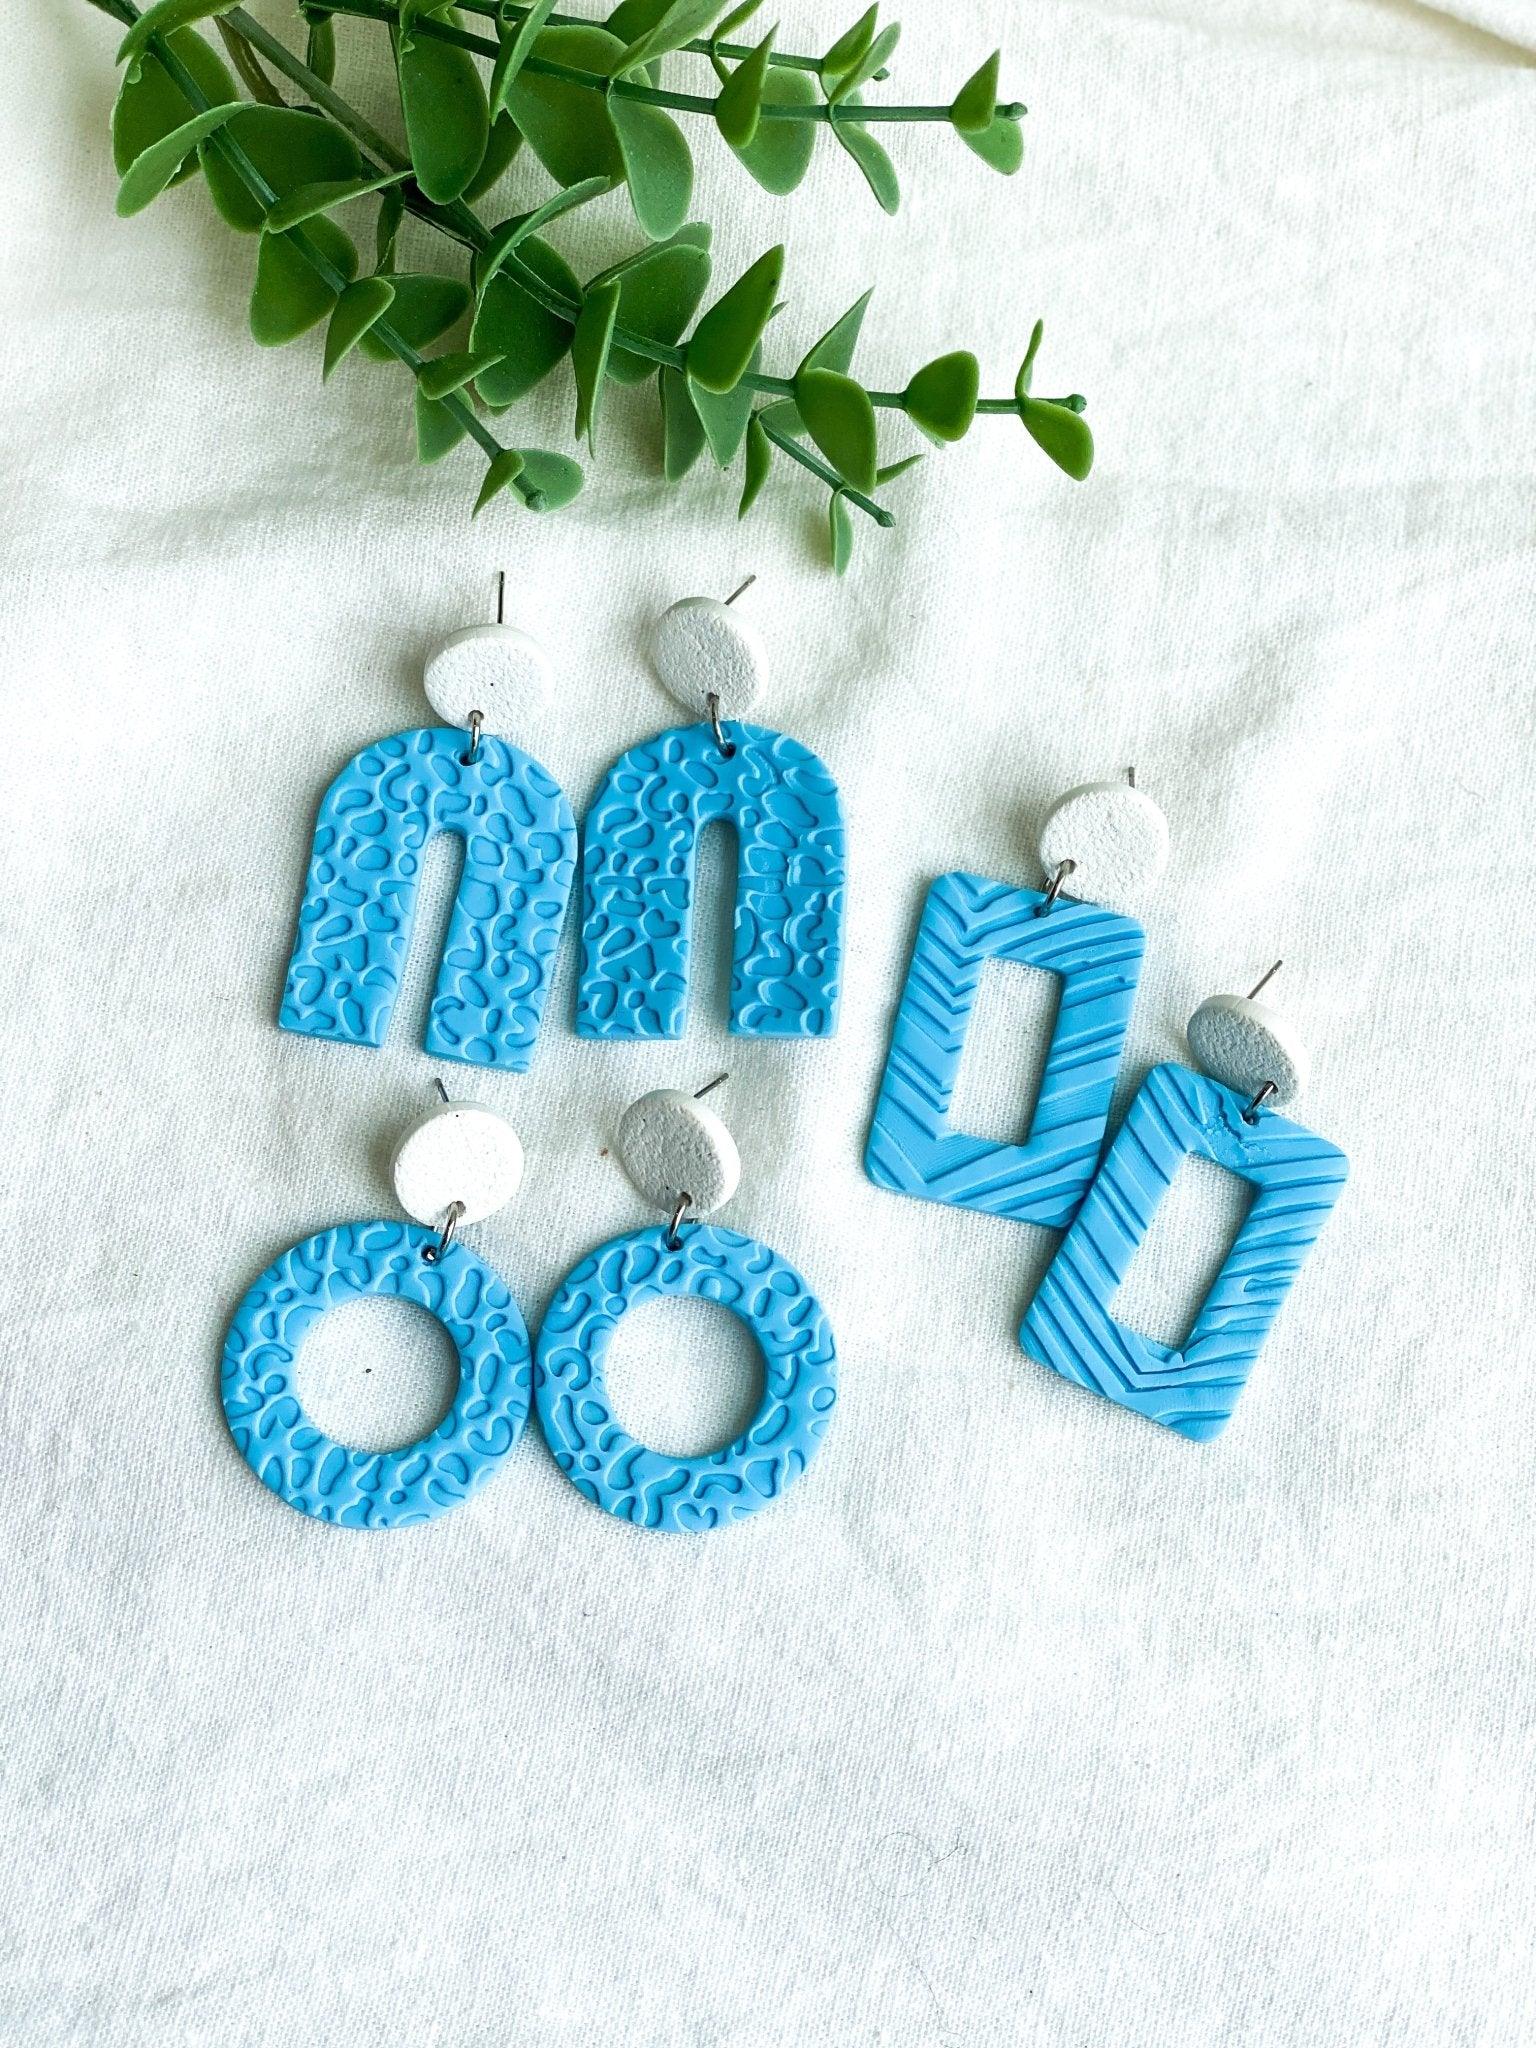 Blue and White College Game Day Earrings - UNC Earrings - Blue Earrings Handmade - College Merch - Gift for College Girl - Harbor to Gulf Co.